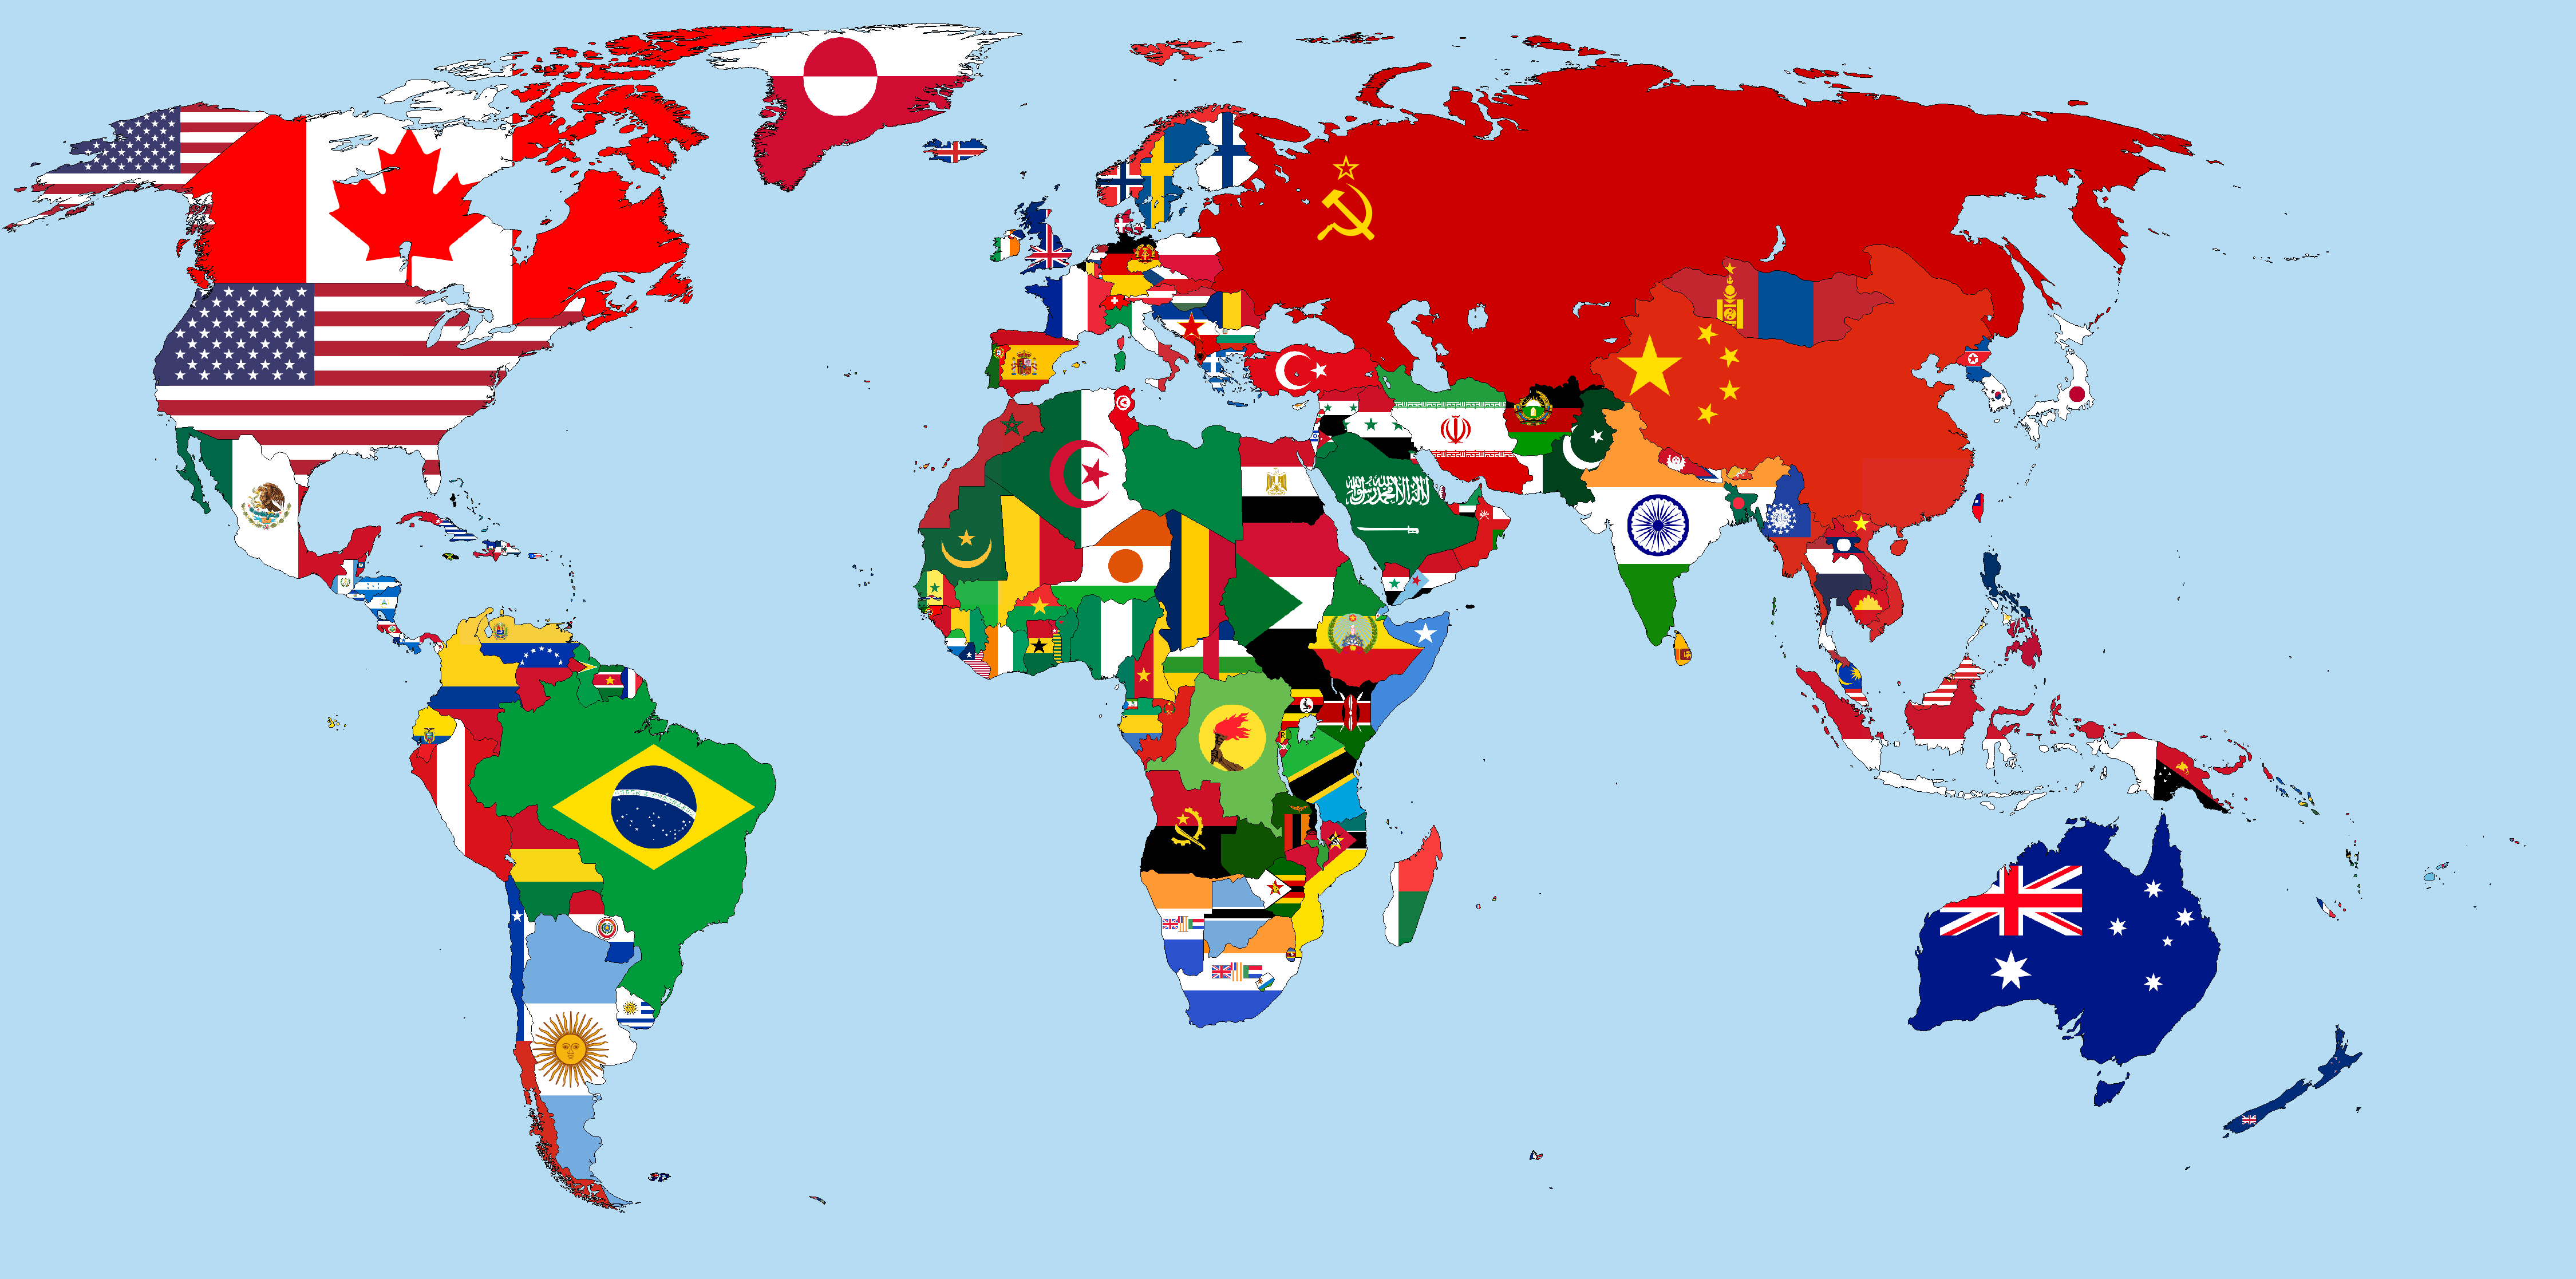 File:Flag-map of the world (1989).png - Wikimedia Commons